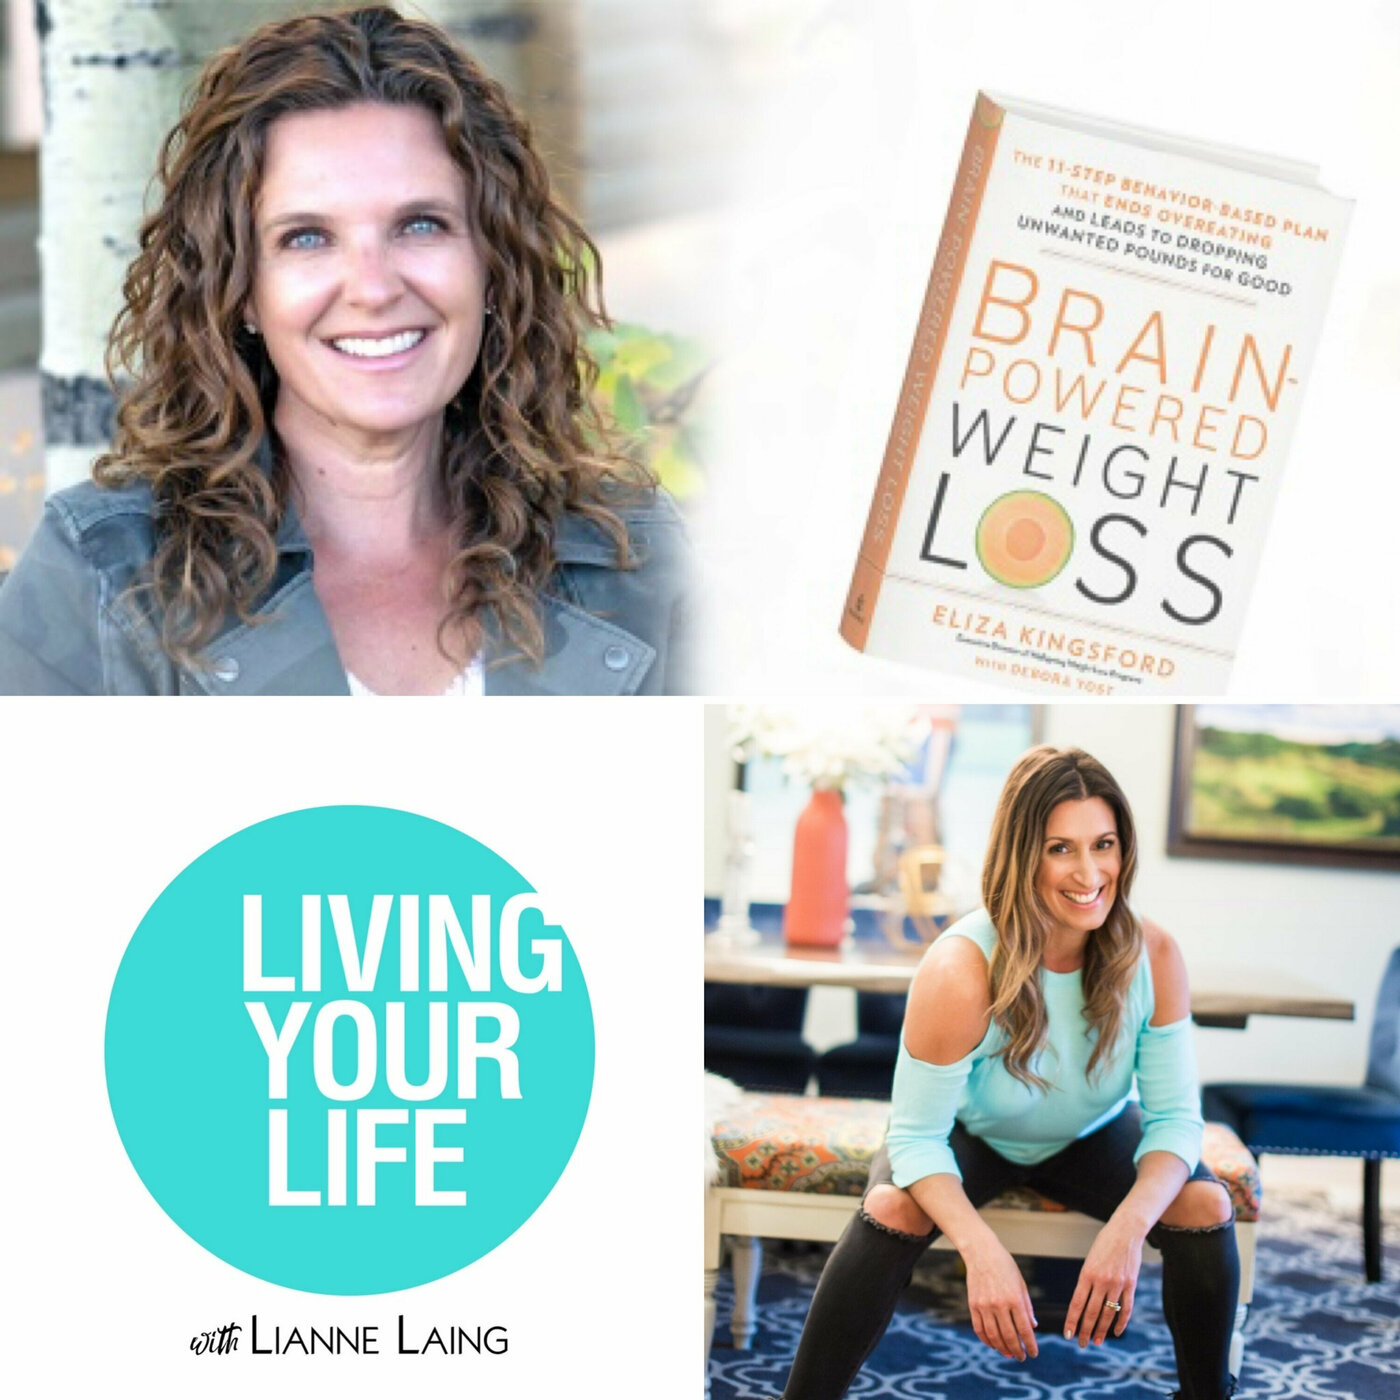 ”Brain Powered Weight Loss” - Eliza Kingsford Explains The Mental Shift Needed For Weight Loss